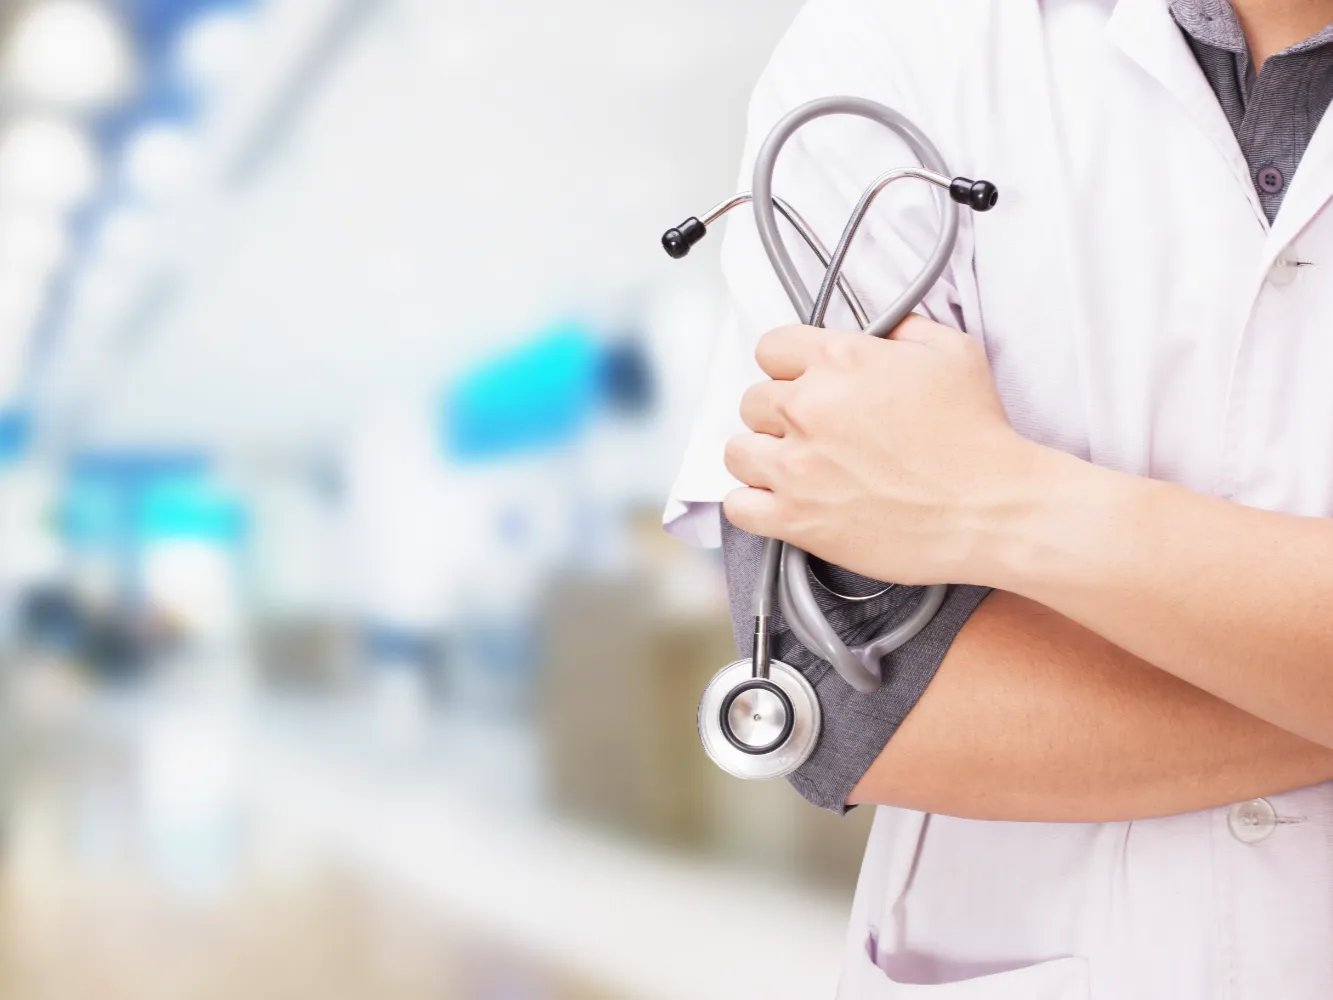 doctor-with-stethoscope-hands-hospital-background